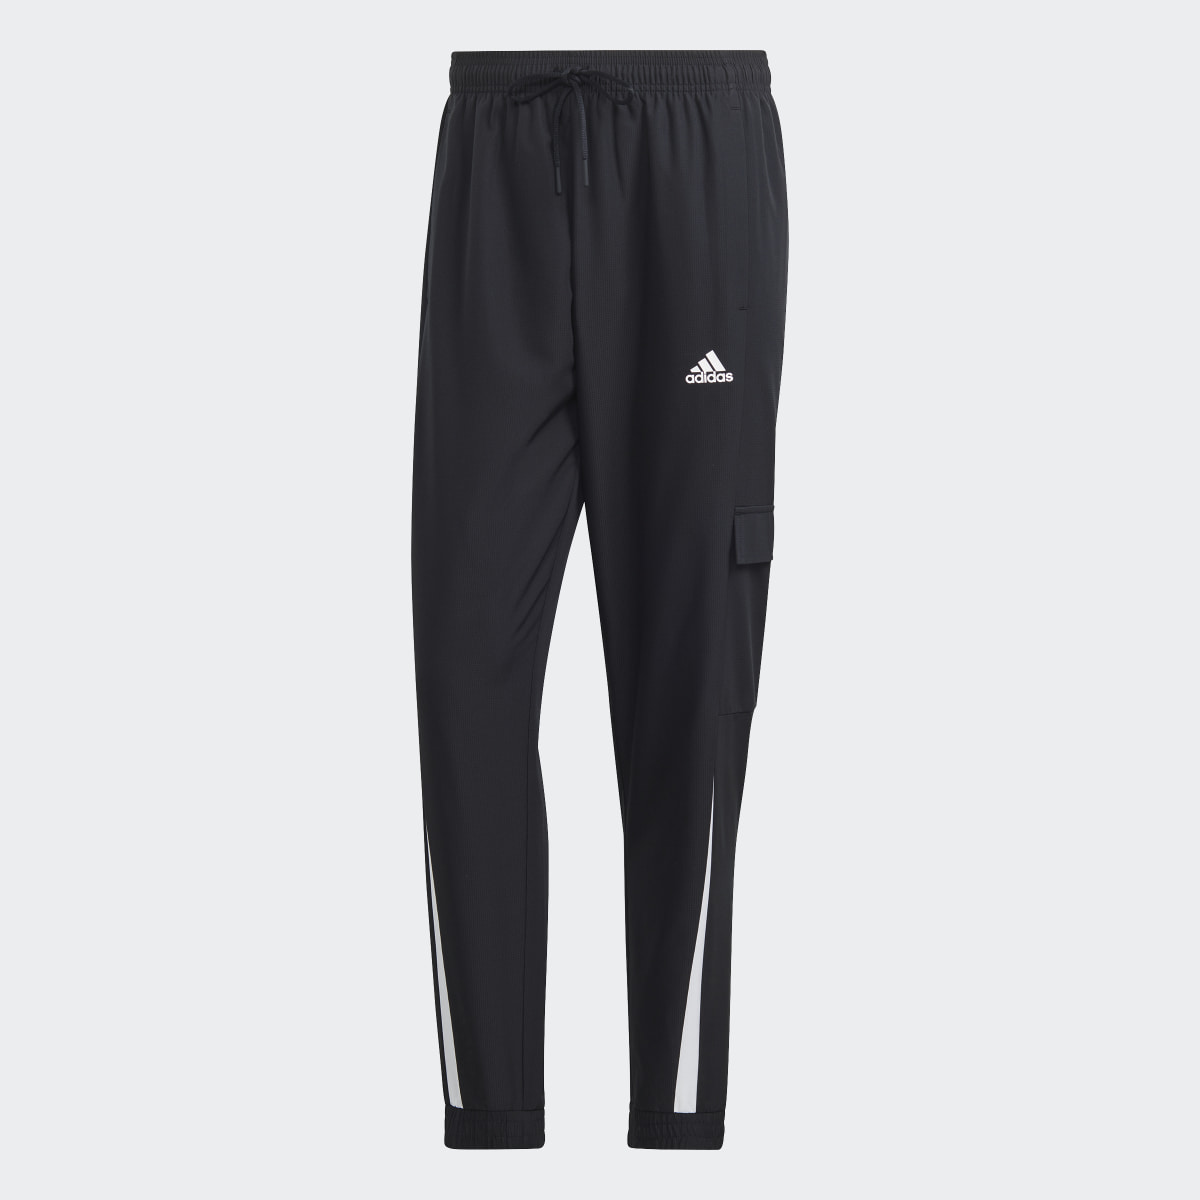 Adidas Sportswear Woven Non-Hooded Track Suit. 7